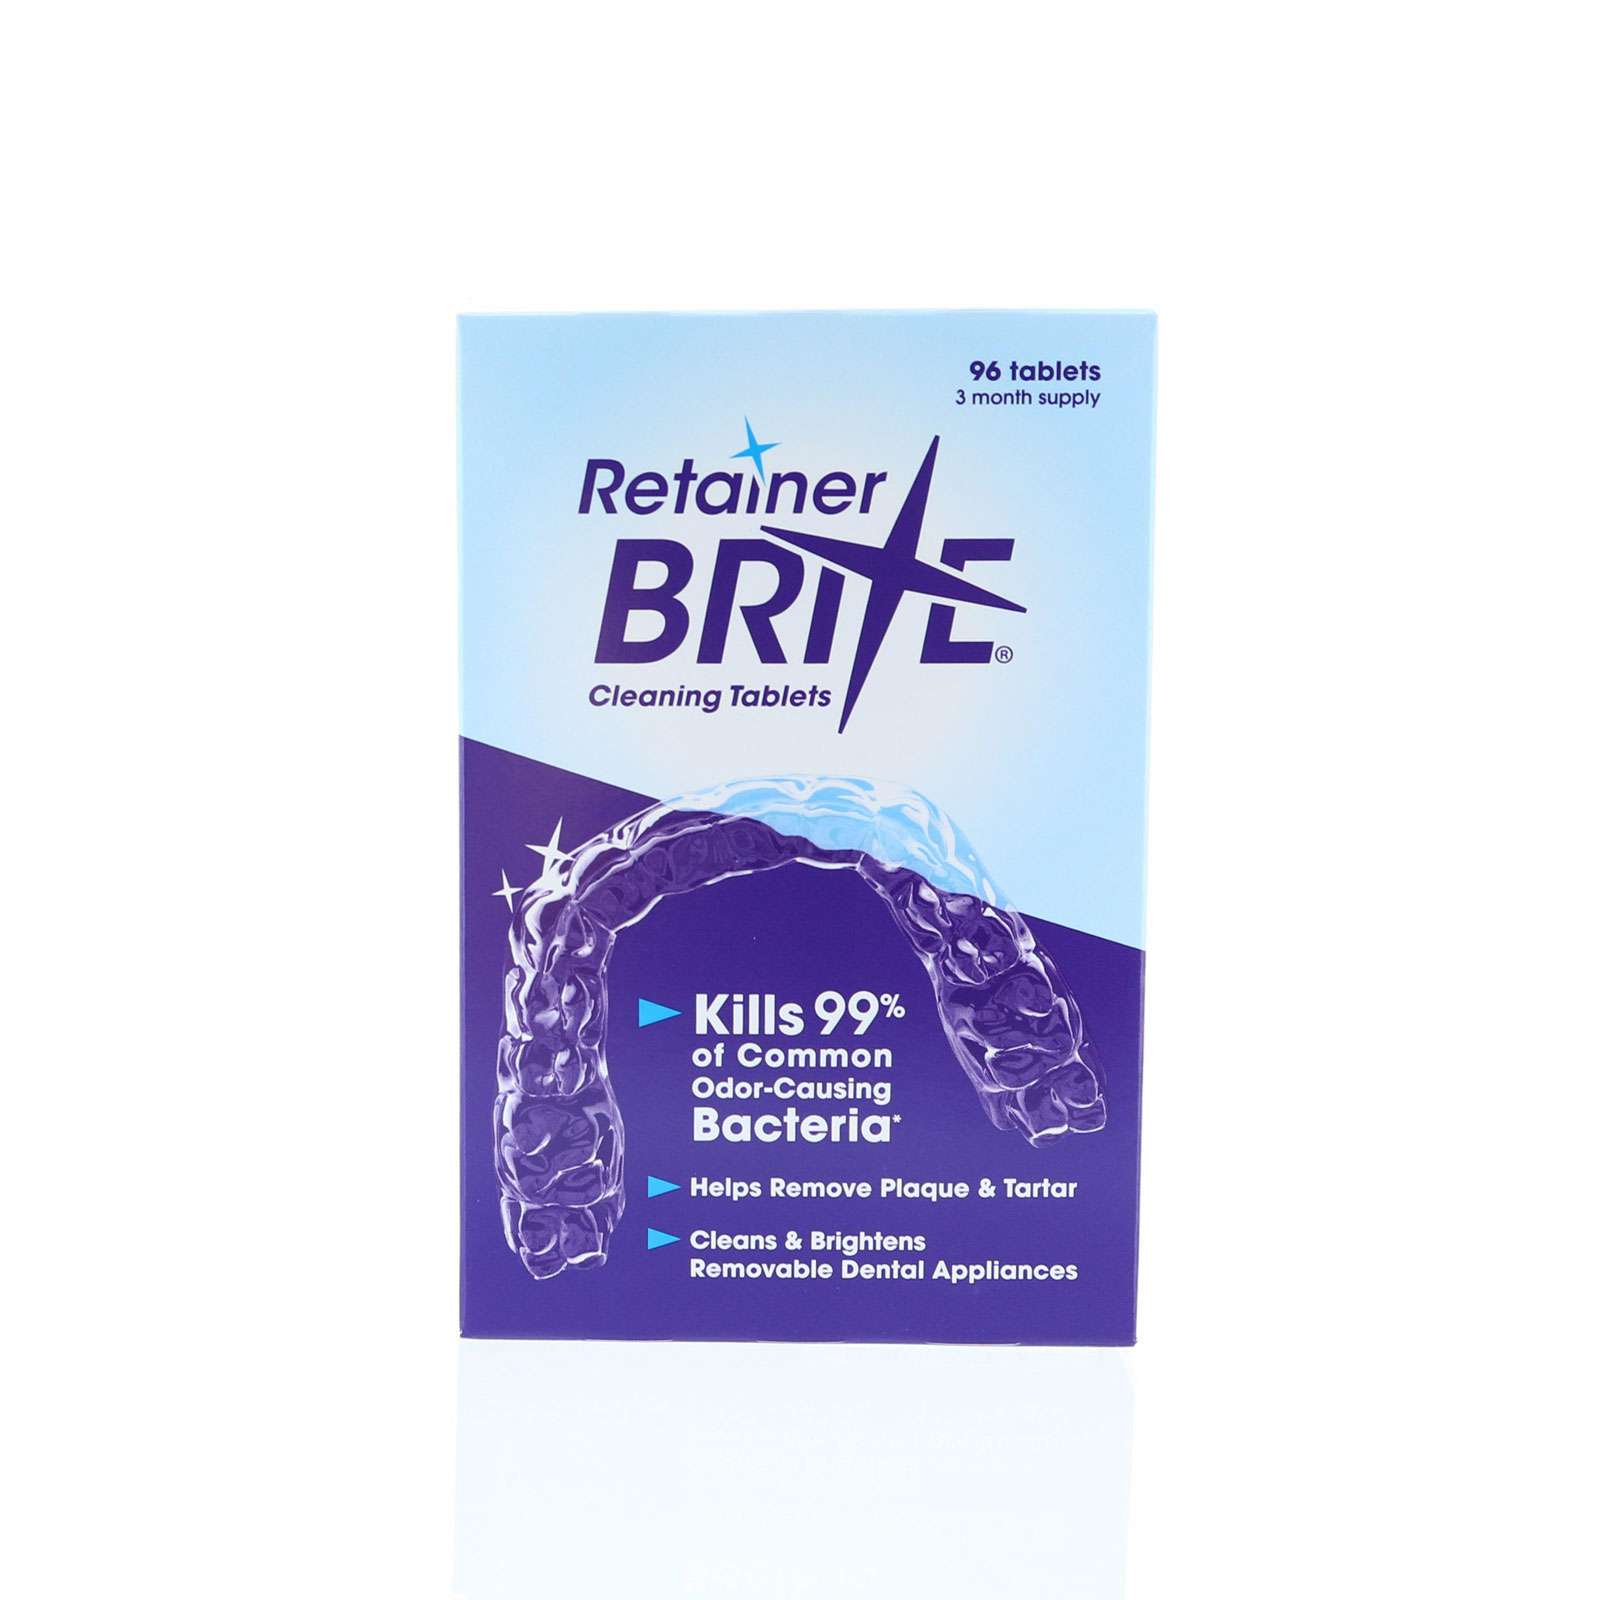 Retainer Brite Cleaning Tablets 96 Tablets - 3 Months Supply